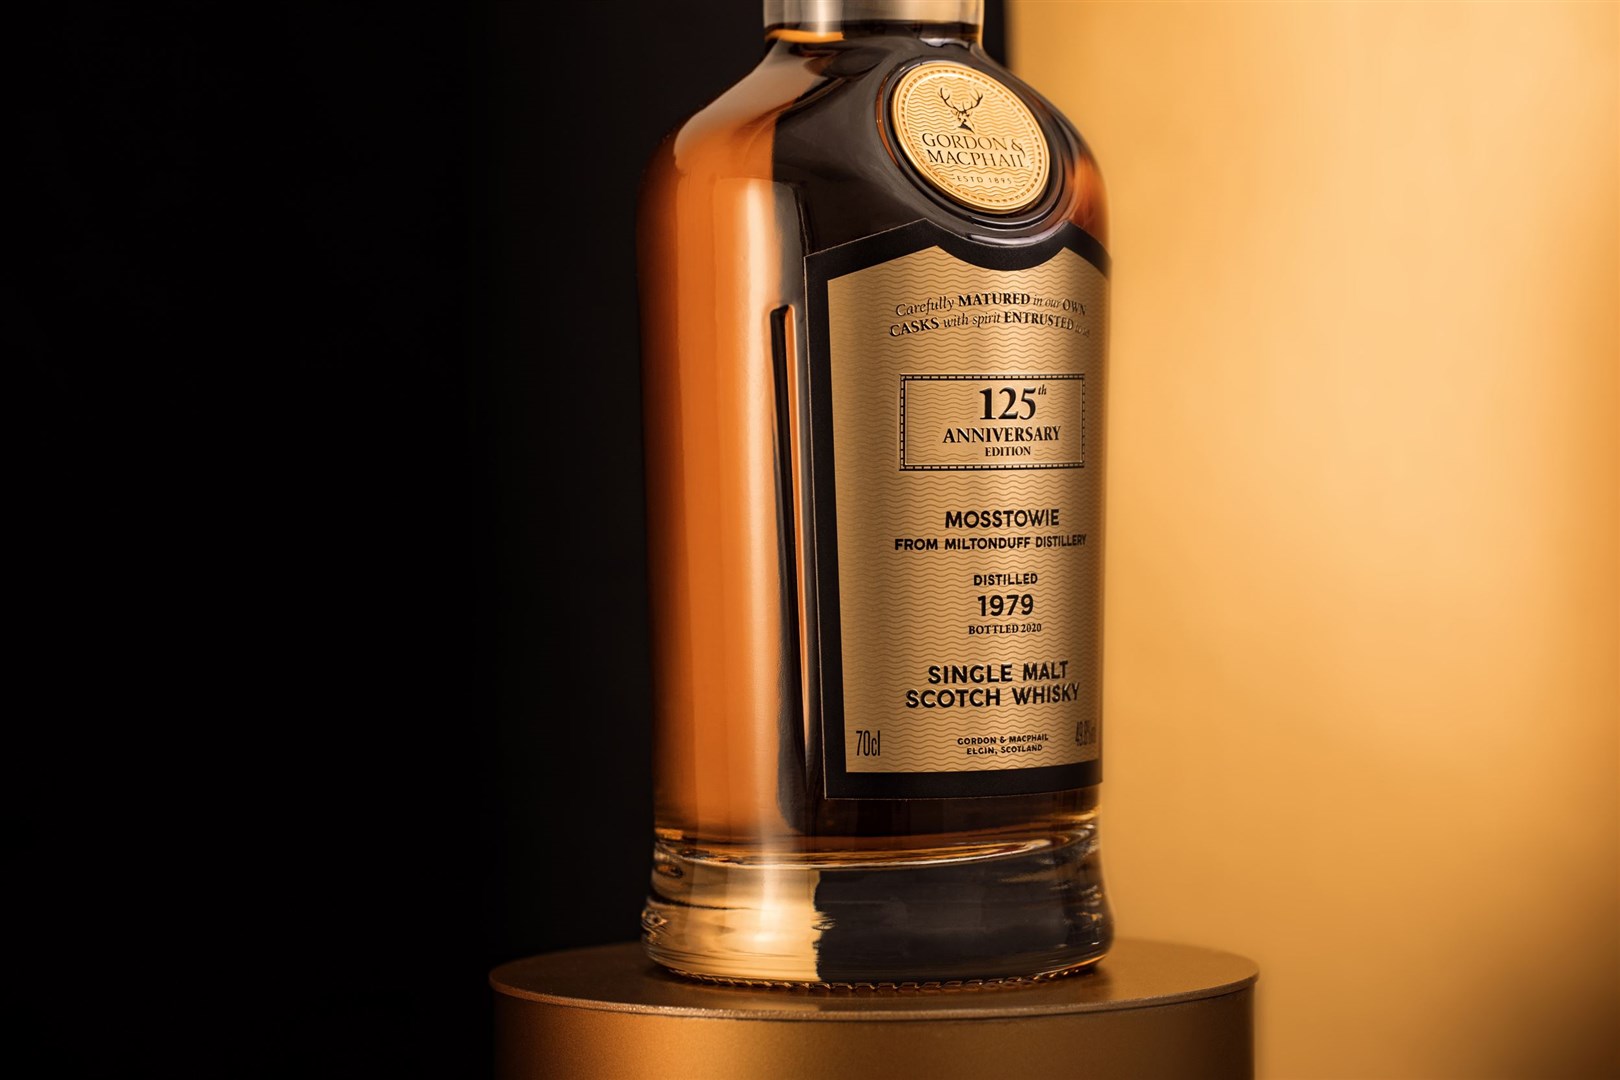 Only 164 bottles of Gordon & MacPhail's 1979 Mosstowie, from Miltonduff Distillery, are available worldwide.